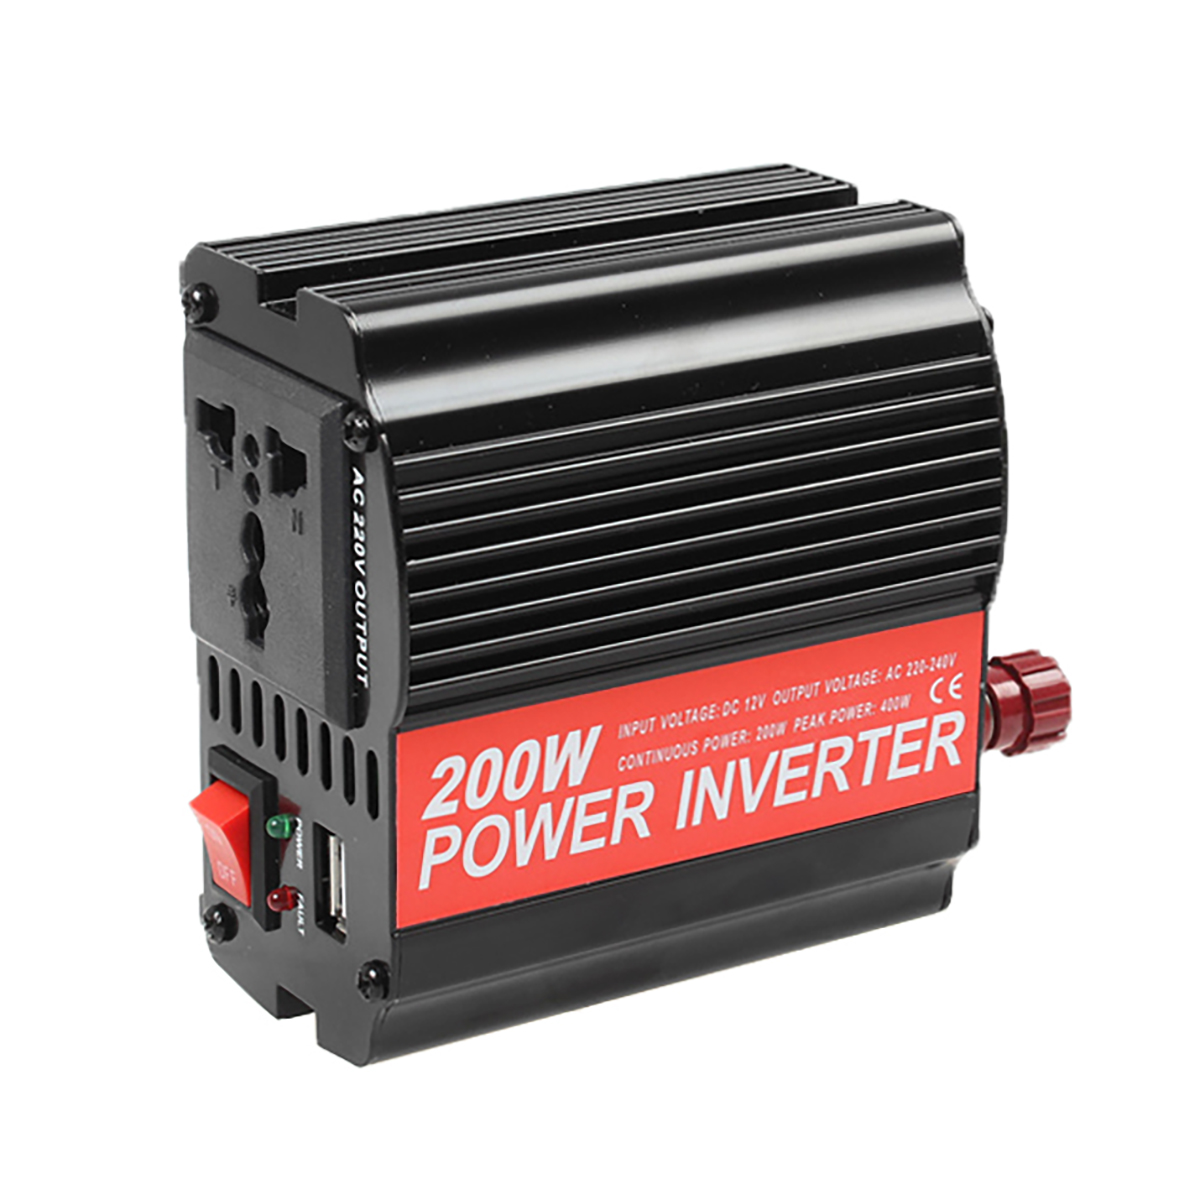 200W Car Inverter Al-Mg Alloy USB 5V/3.1A 12V to 110V Peak 300W Travel Essential for US Japan